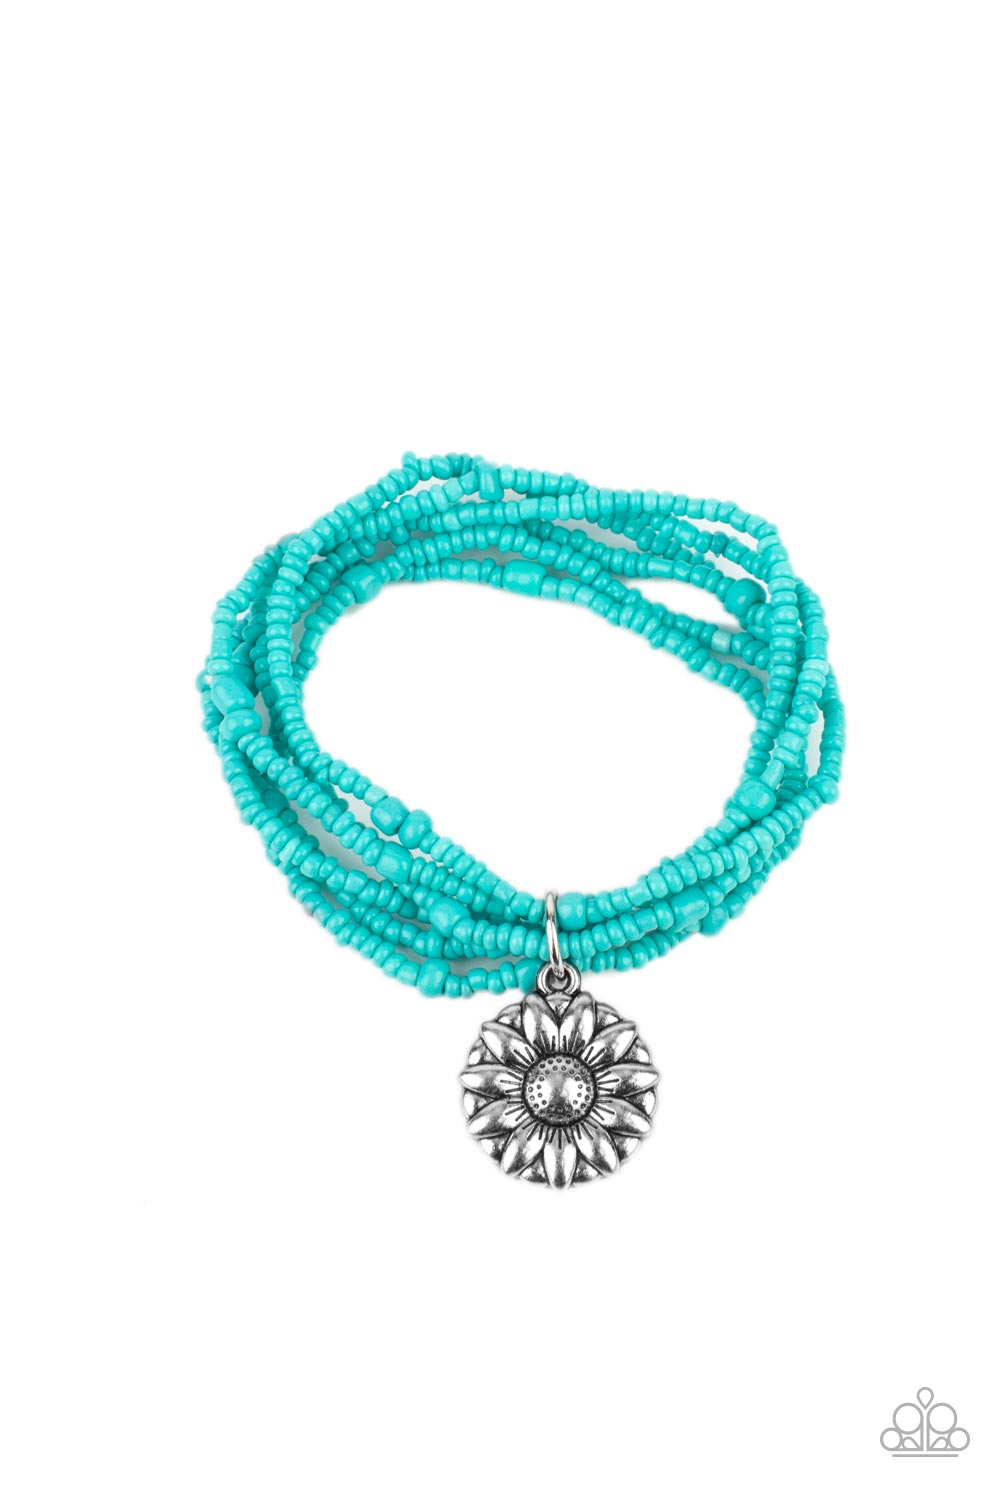 Badlands Botany Turquoise Blue Seed Bead Flower Bracelet - Paparazzi Accessories - lightbox -CarasShop.com - $5 Jewelry by Cara Jewels